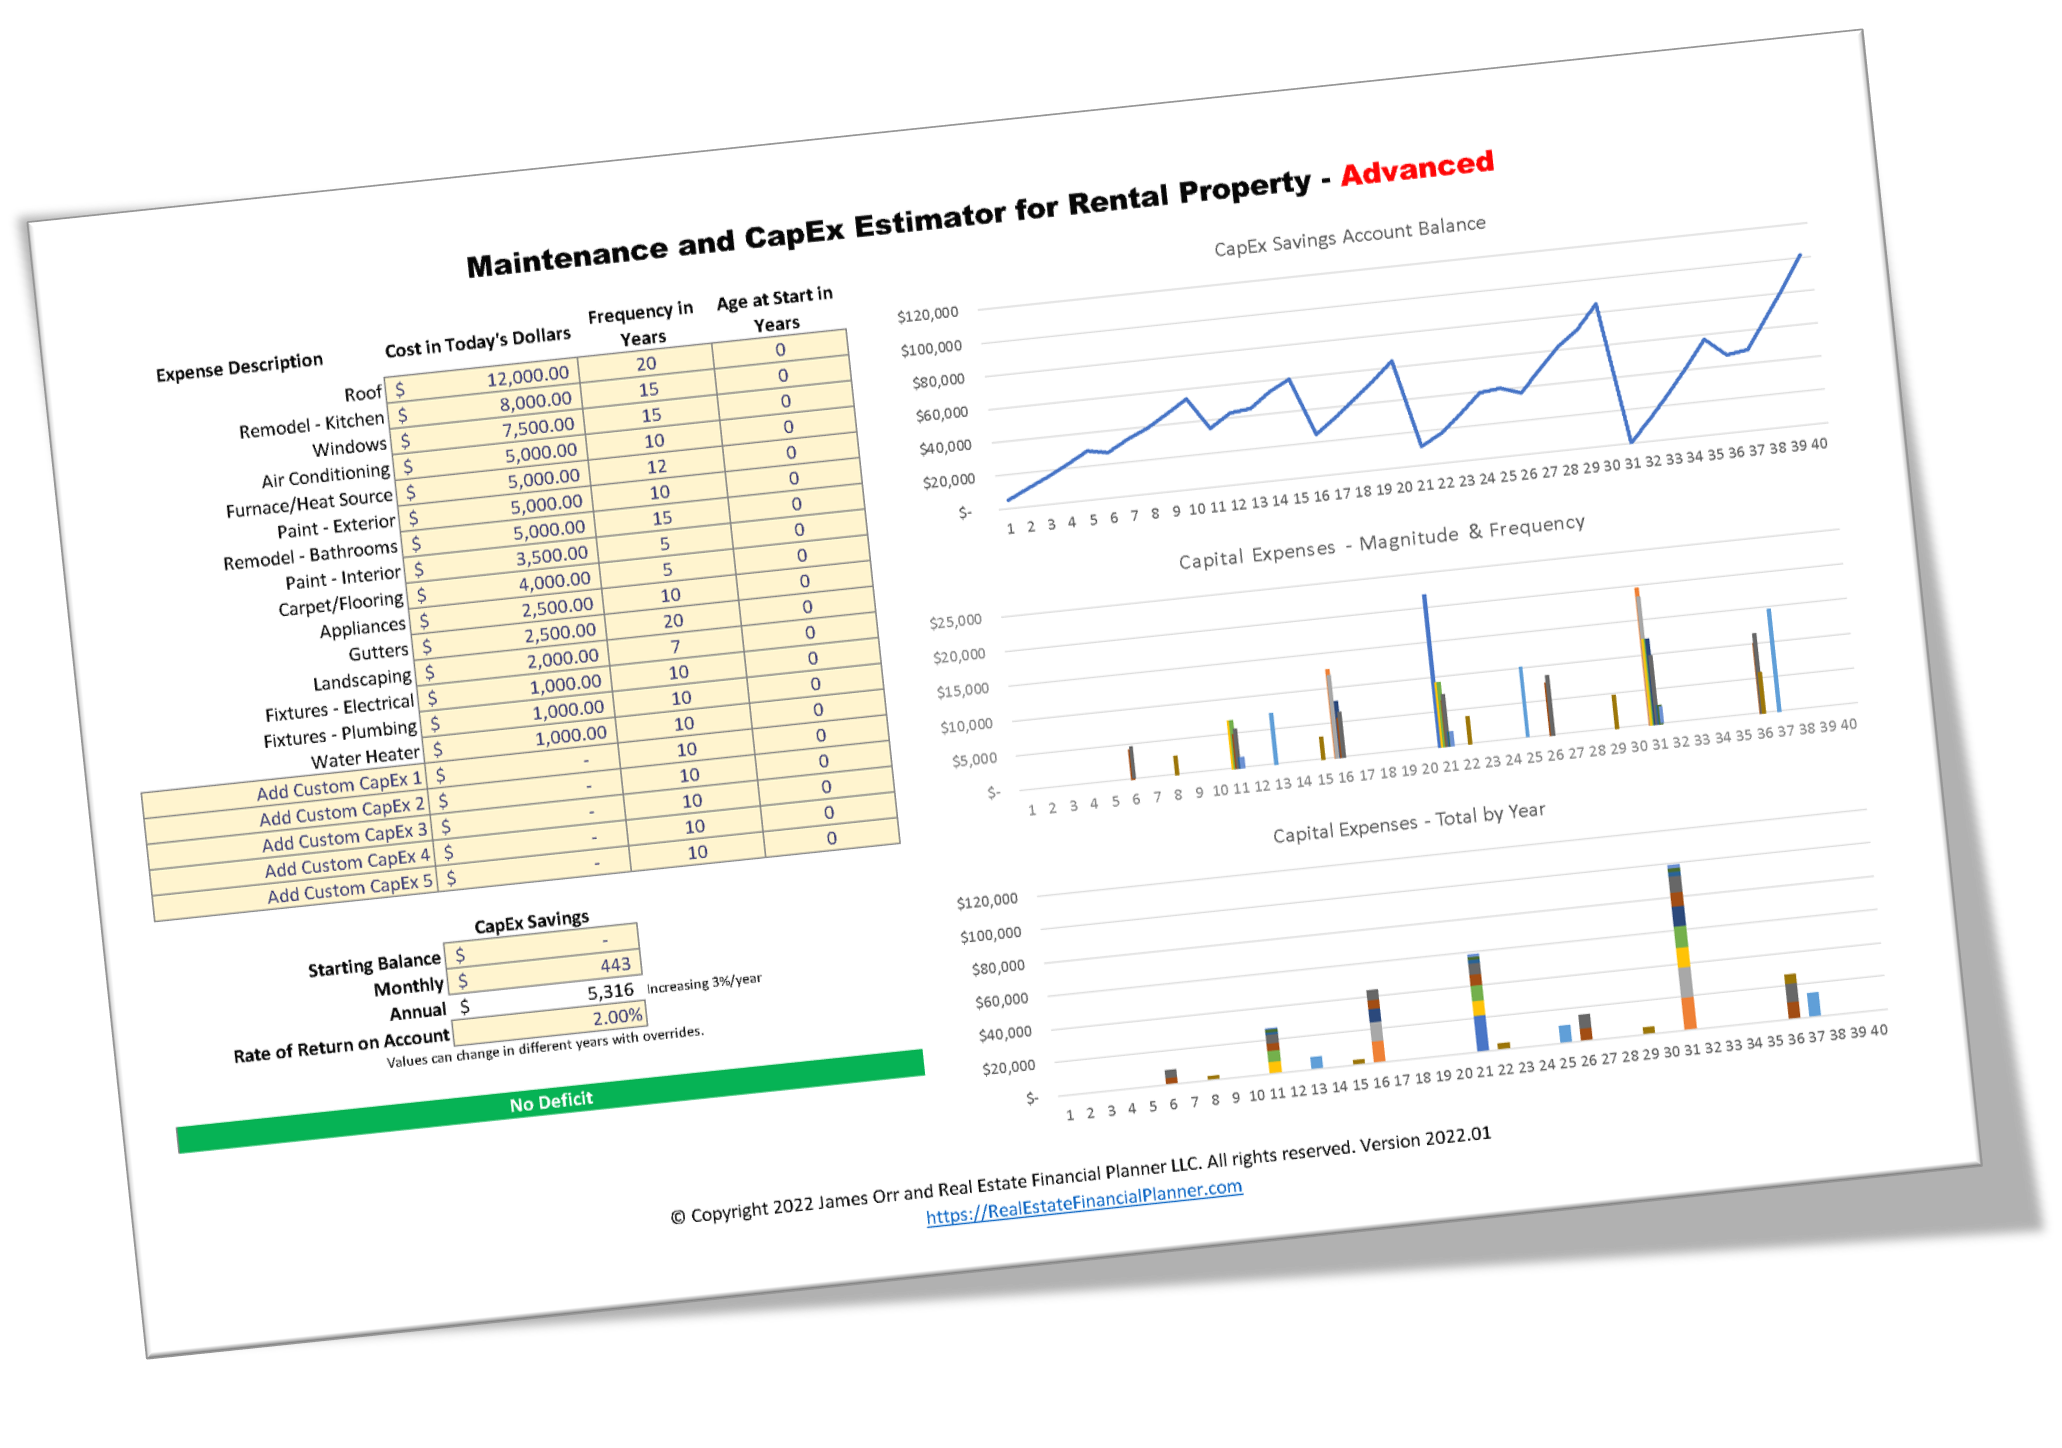 Maintenance and CapEx Estimator for Rental Property - Advanced